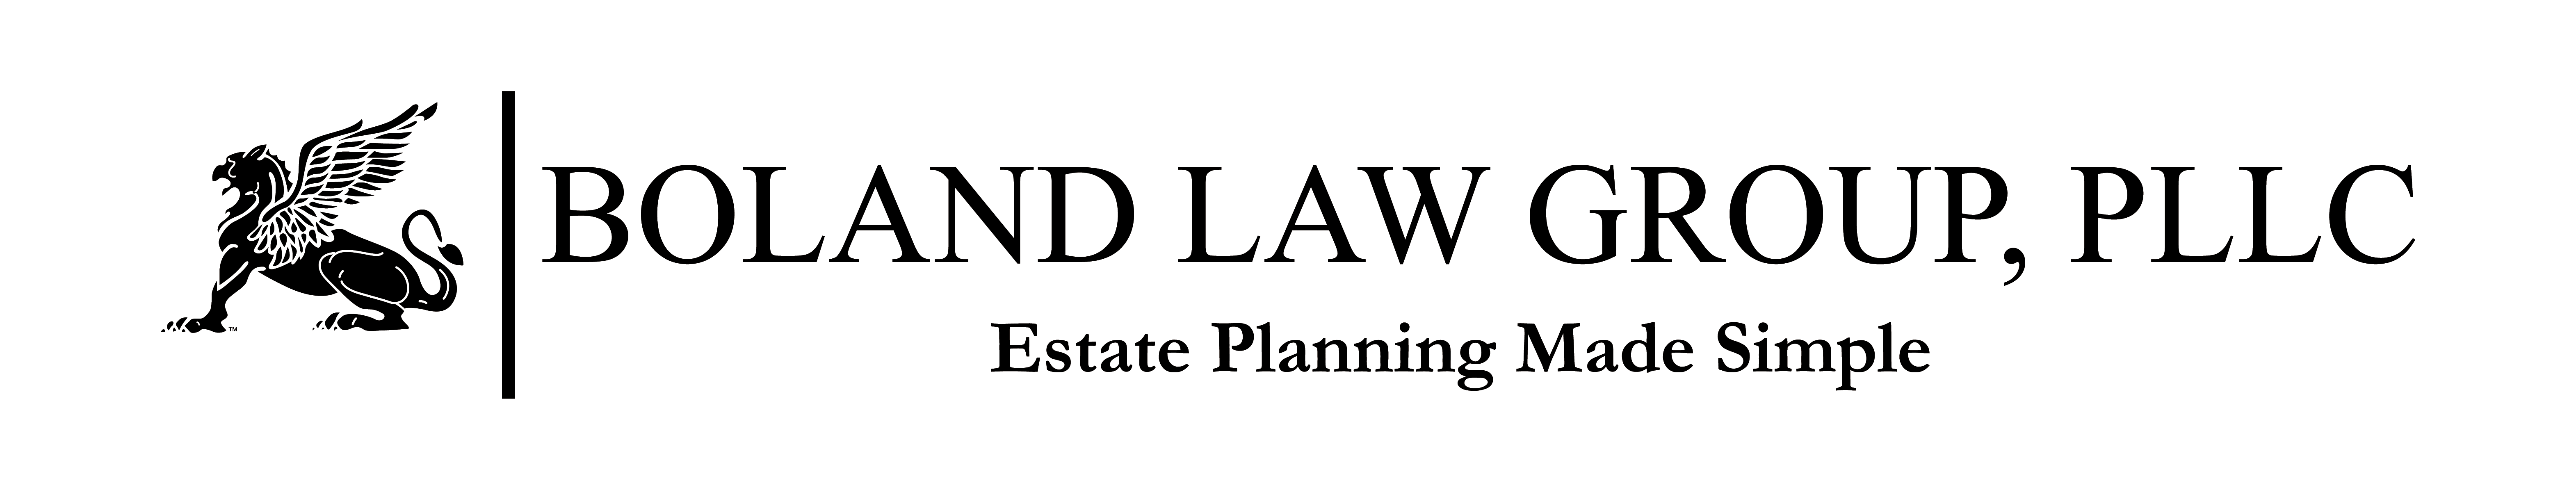 For more information about Boland Law Group, PLLC - Click Here.